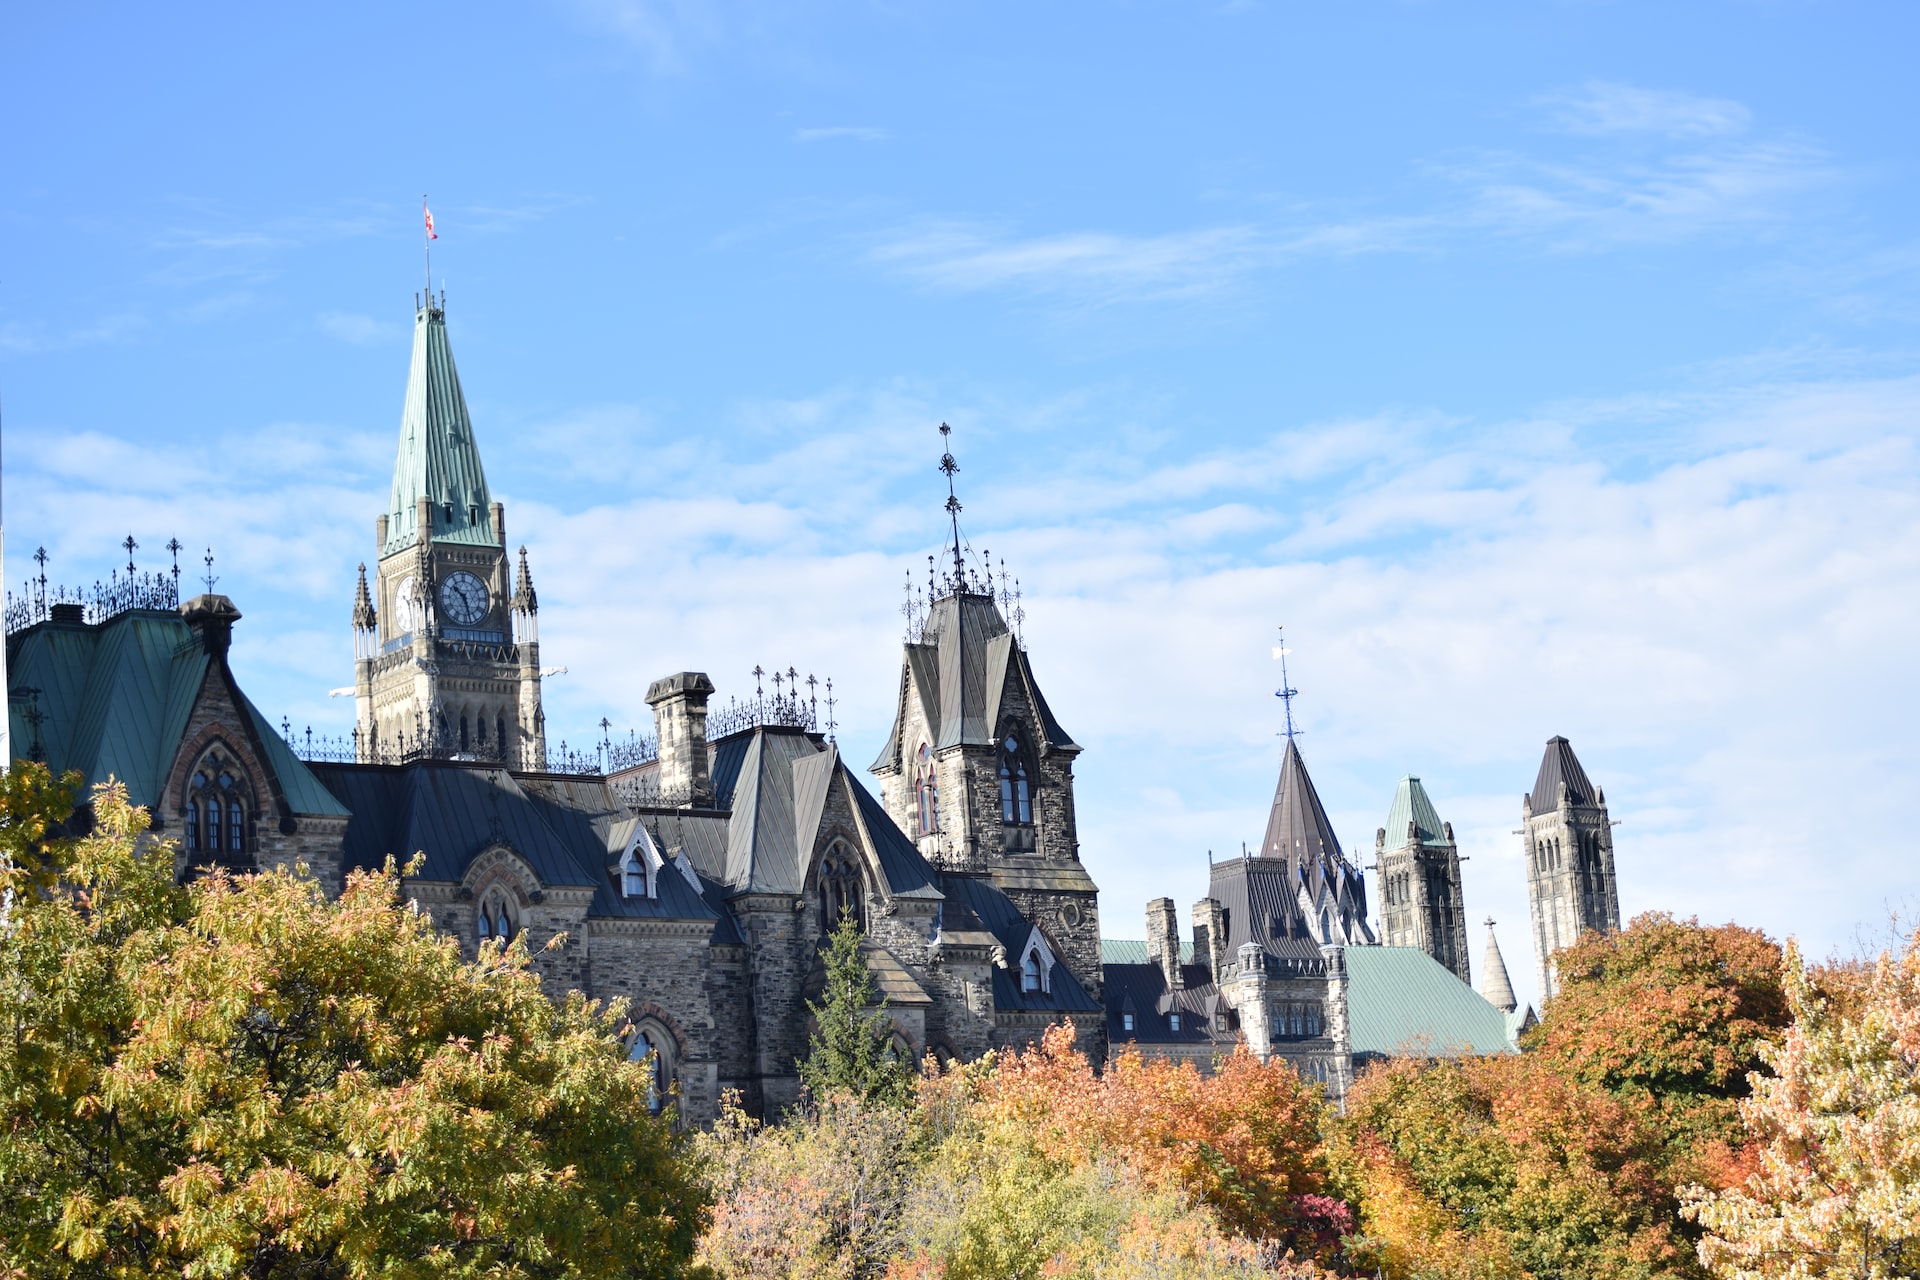 view of Parliament Hill in Ottawa